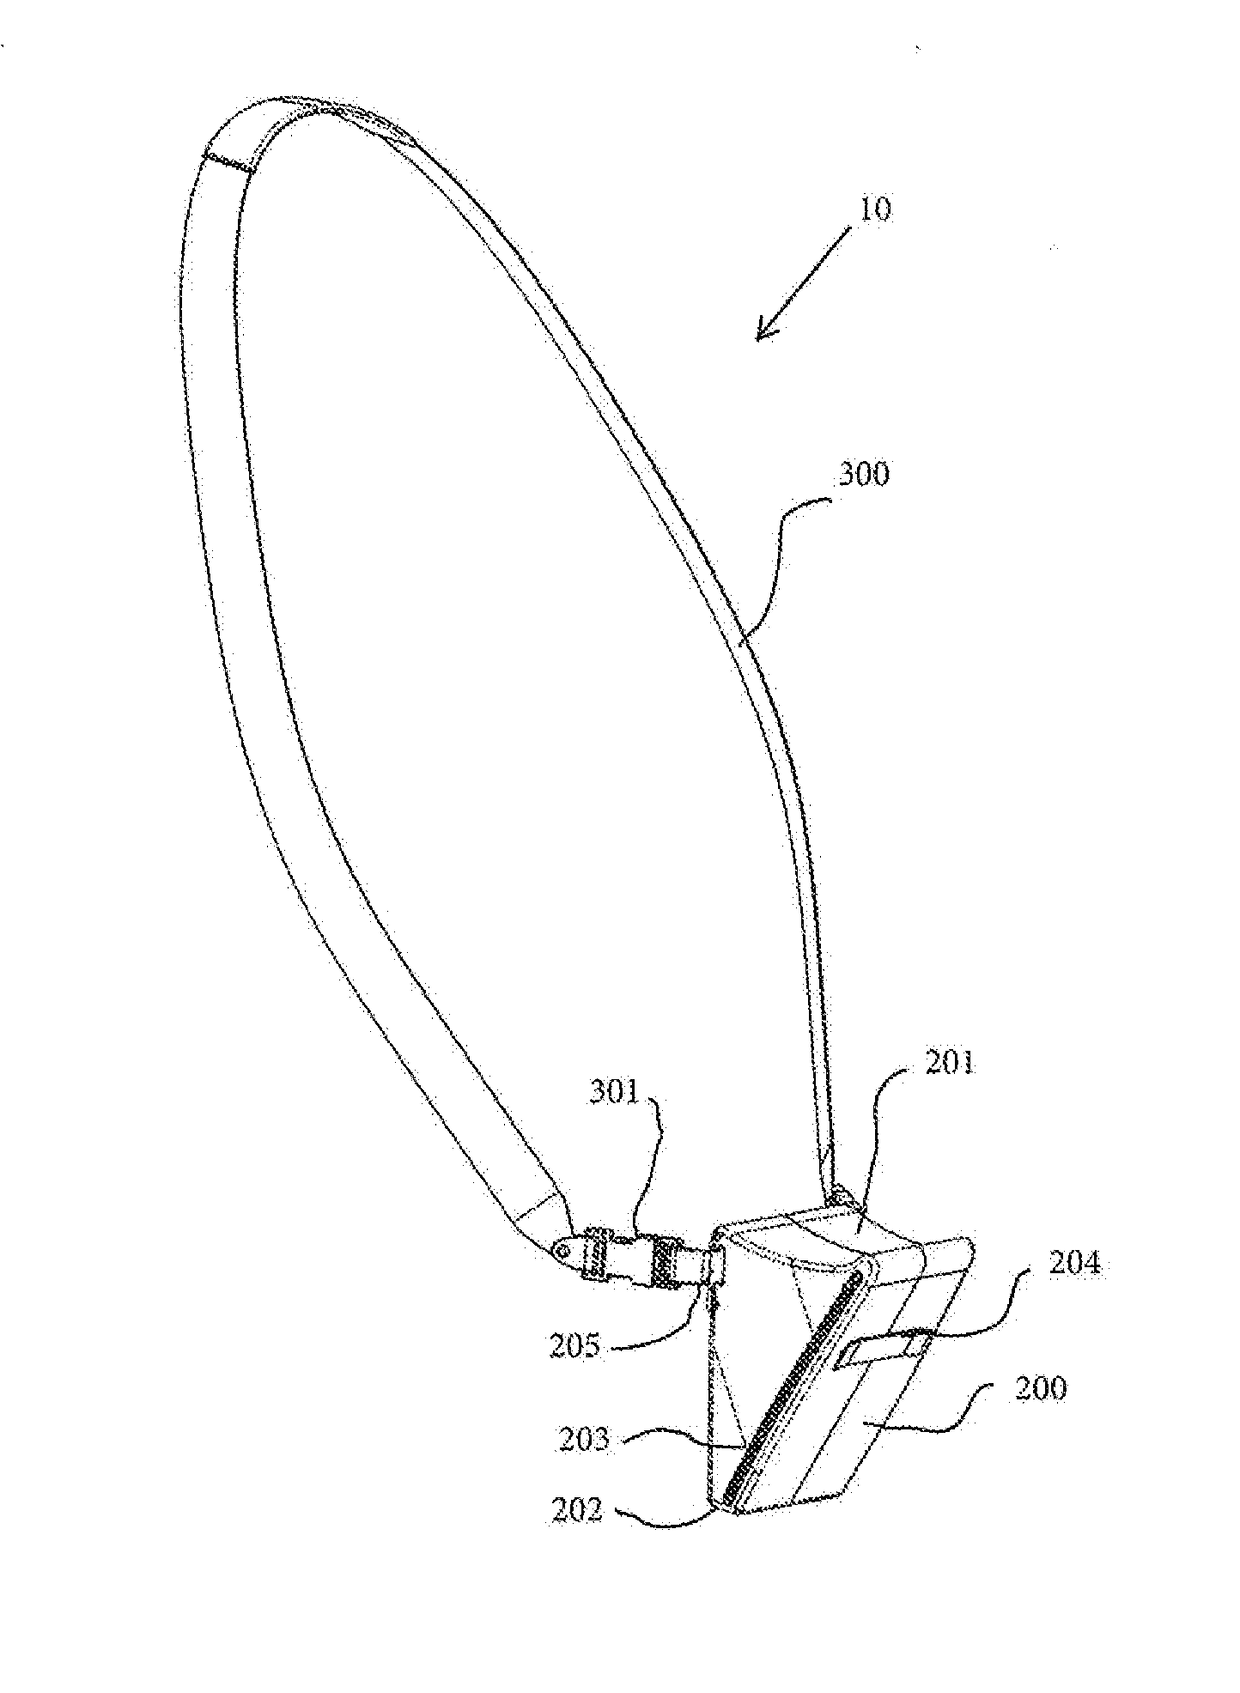 Hip extension device adapted for carrying objects